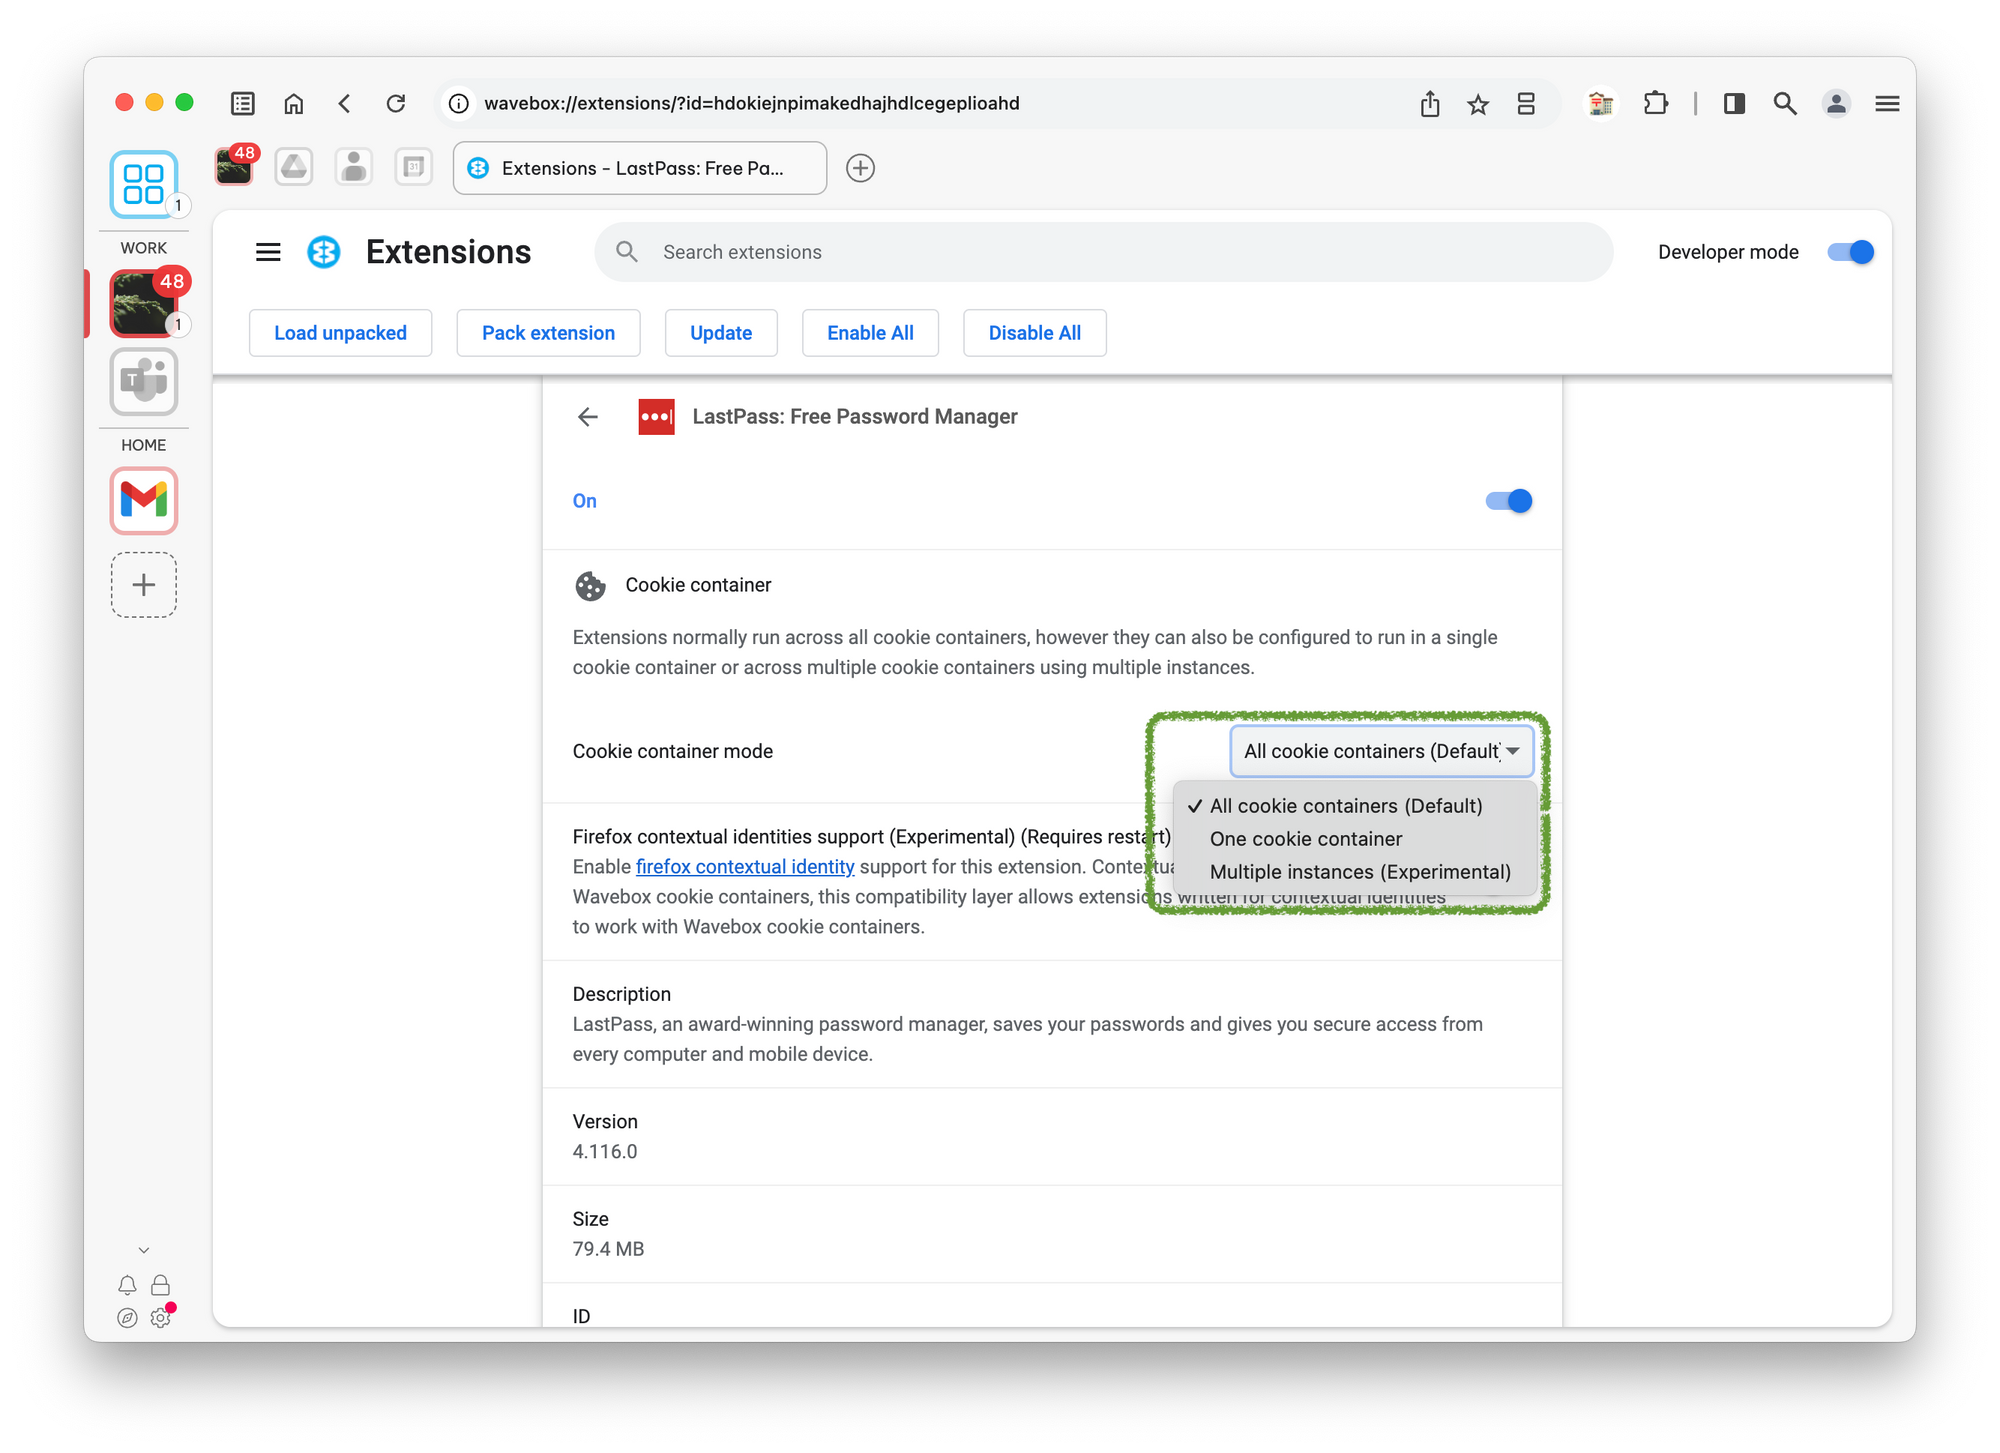 🧩 New! Support for Multiple Chrome Extension Accounts.